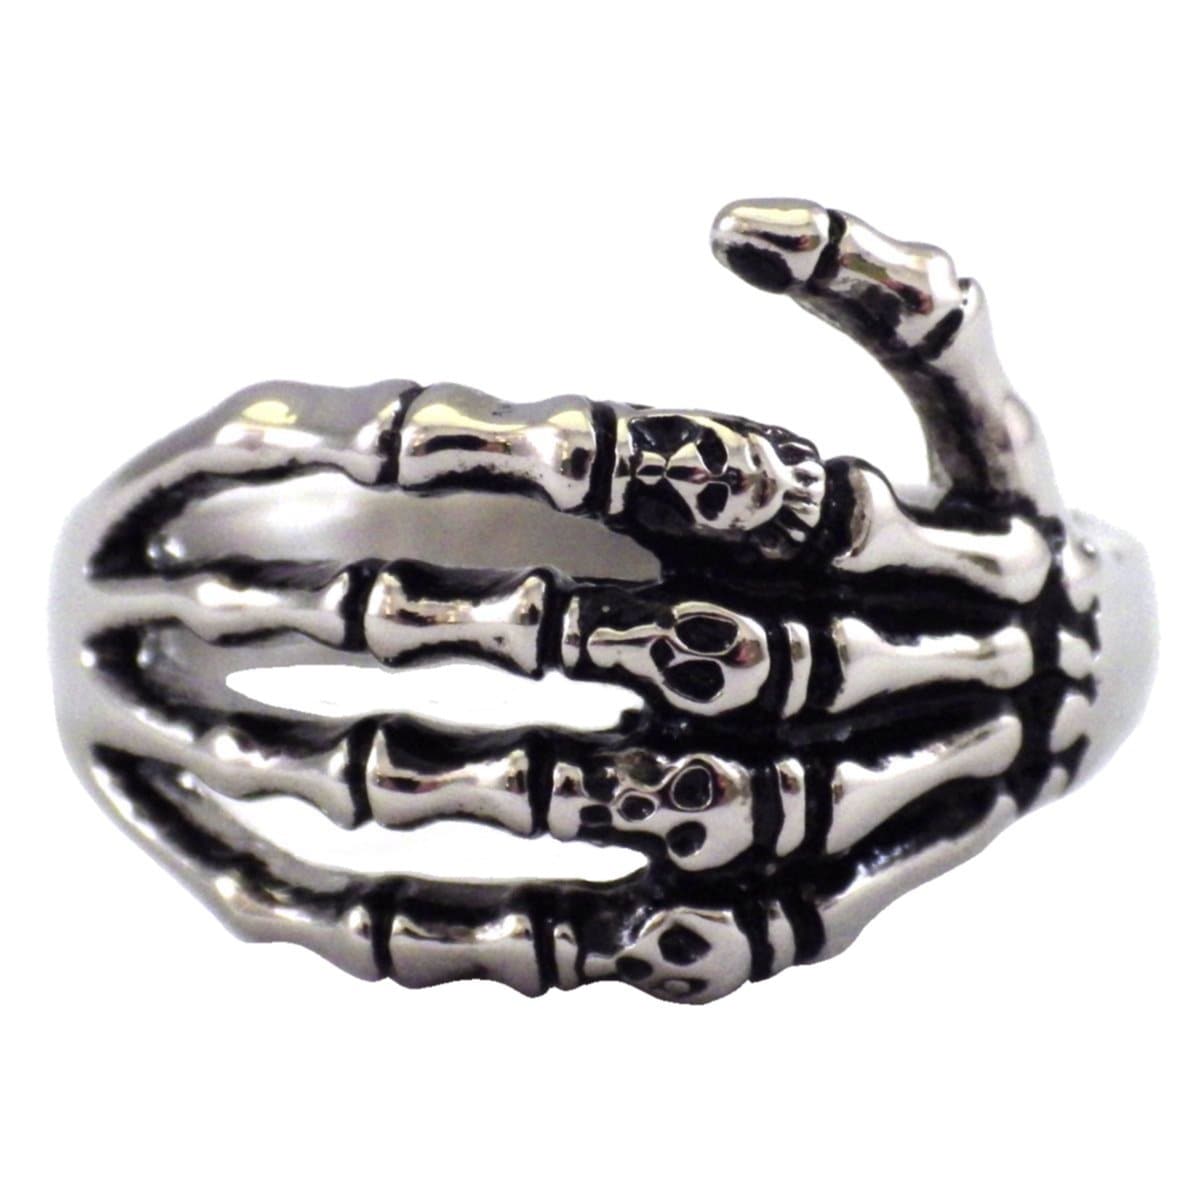 Buy Awesome Skeleton Hand Ring With Voodoo Skull Details on Each Finger  .925 Sterling Silver, Biker, Goth, Metal, Pagan, Celtic Sizes M Z Online in  India - Etsy